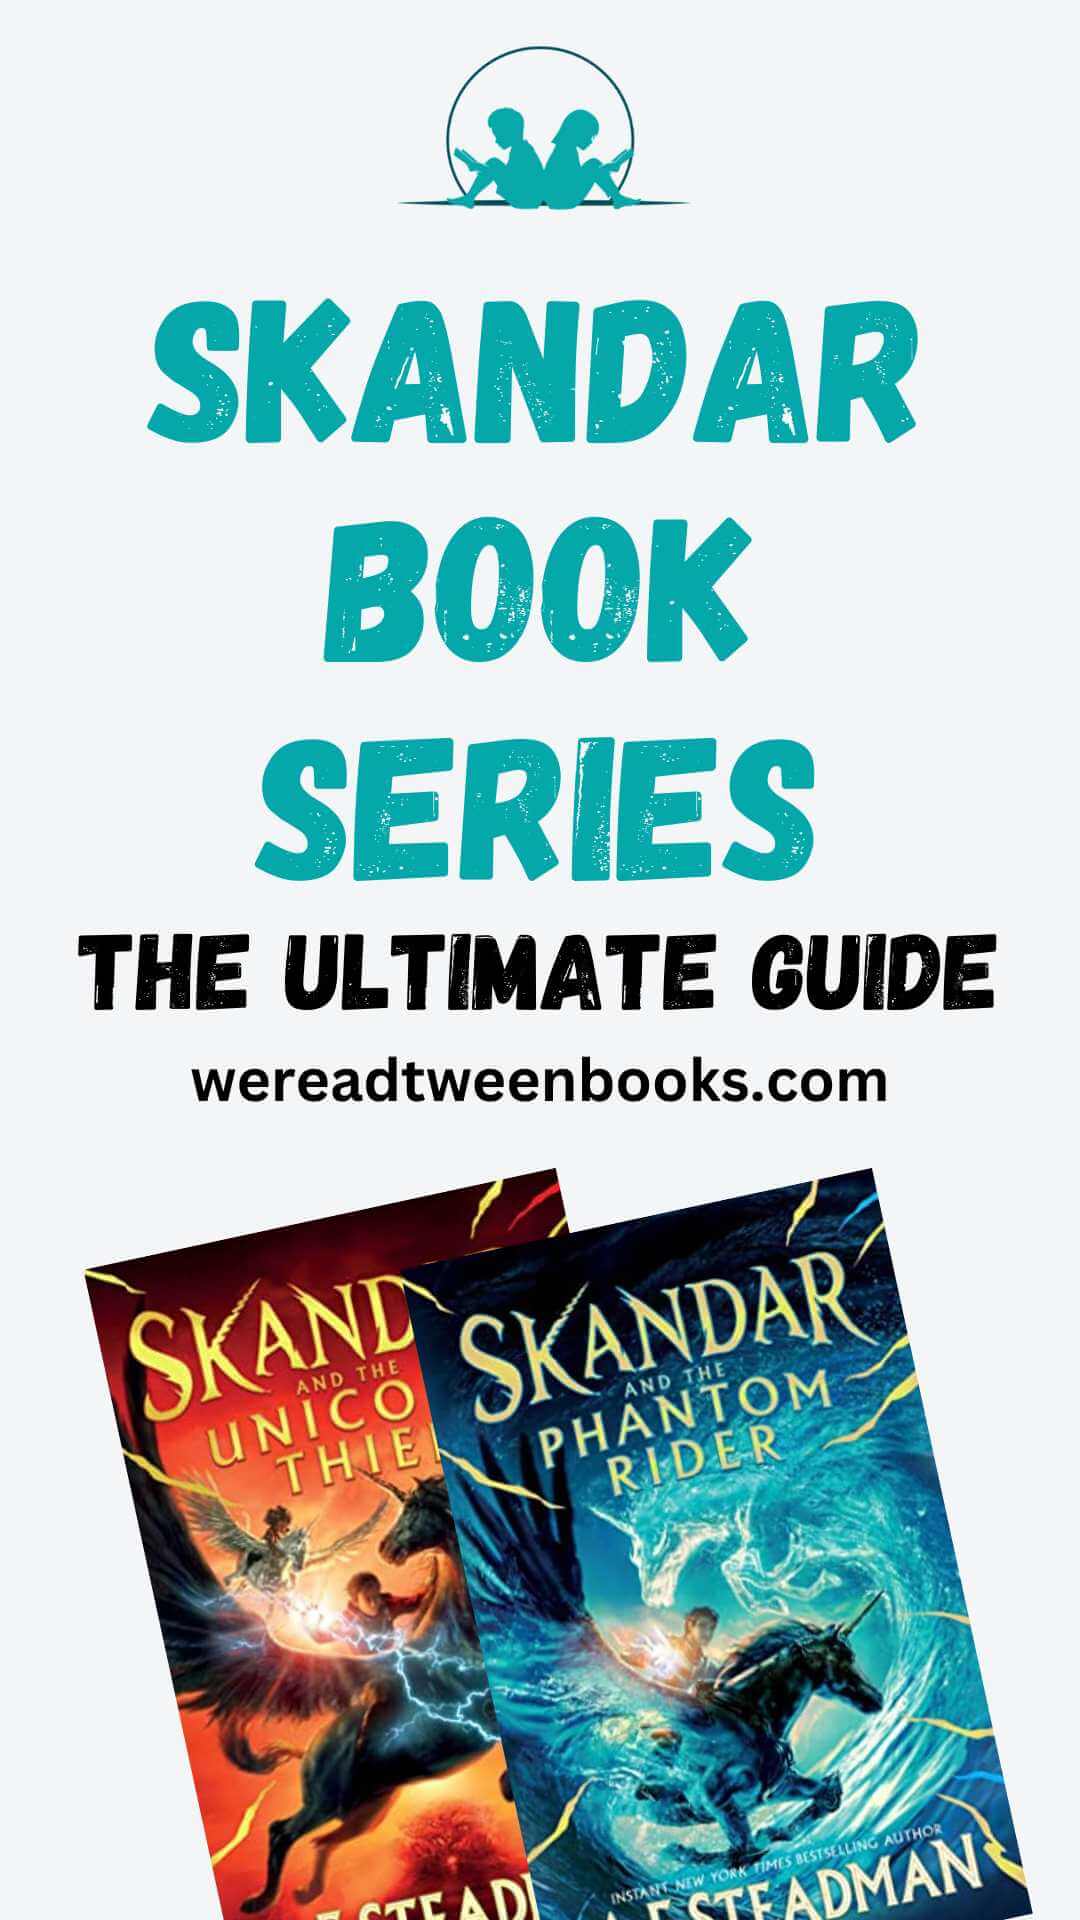 Check out the ultimate guide to the Skandar series to learn all about this middle grade fantasy series from We Read Tween Books.